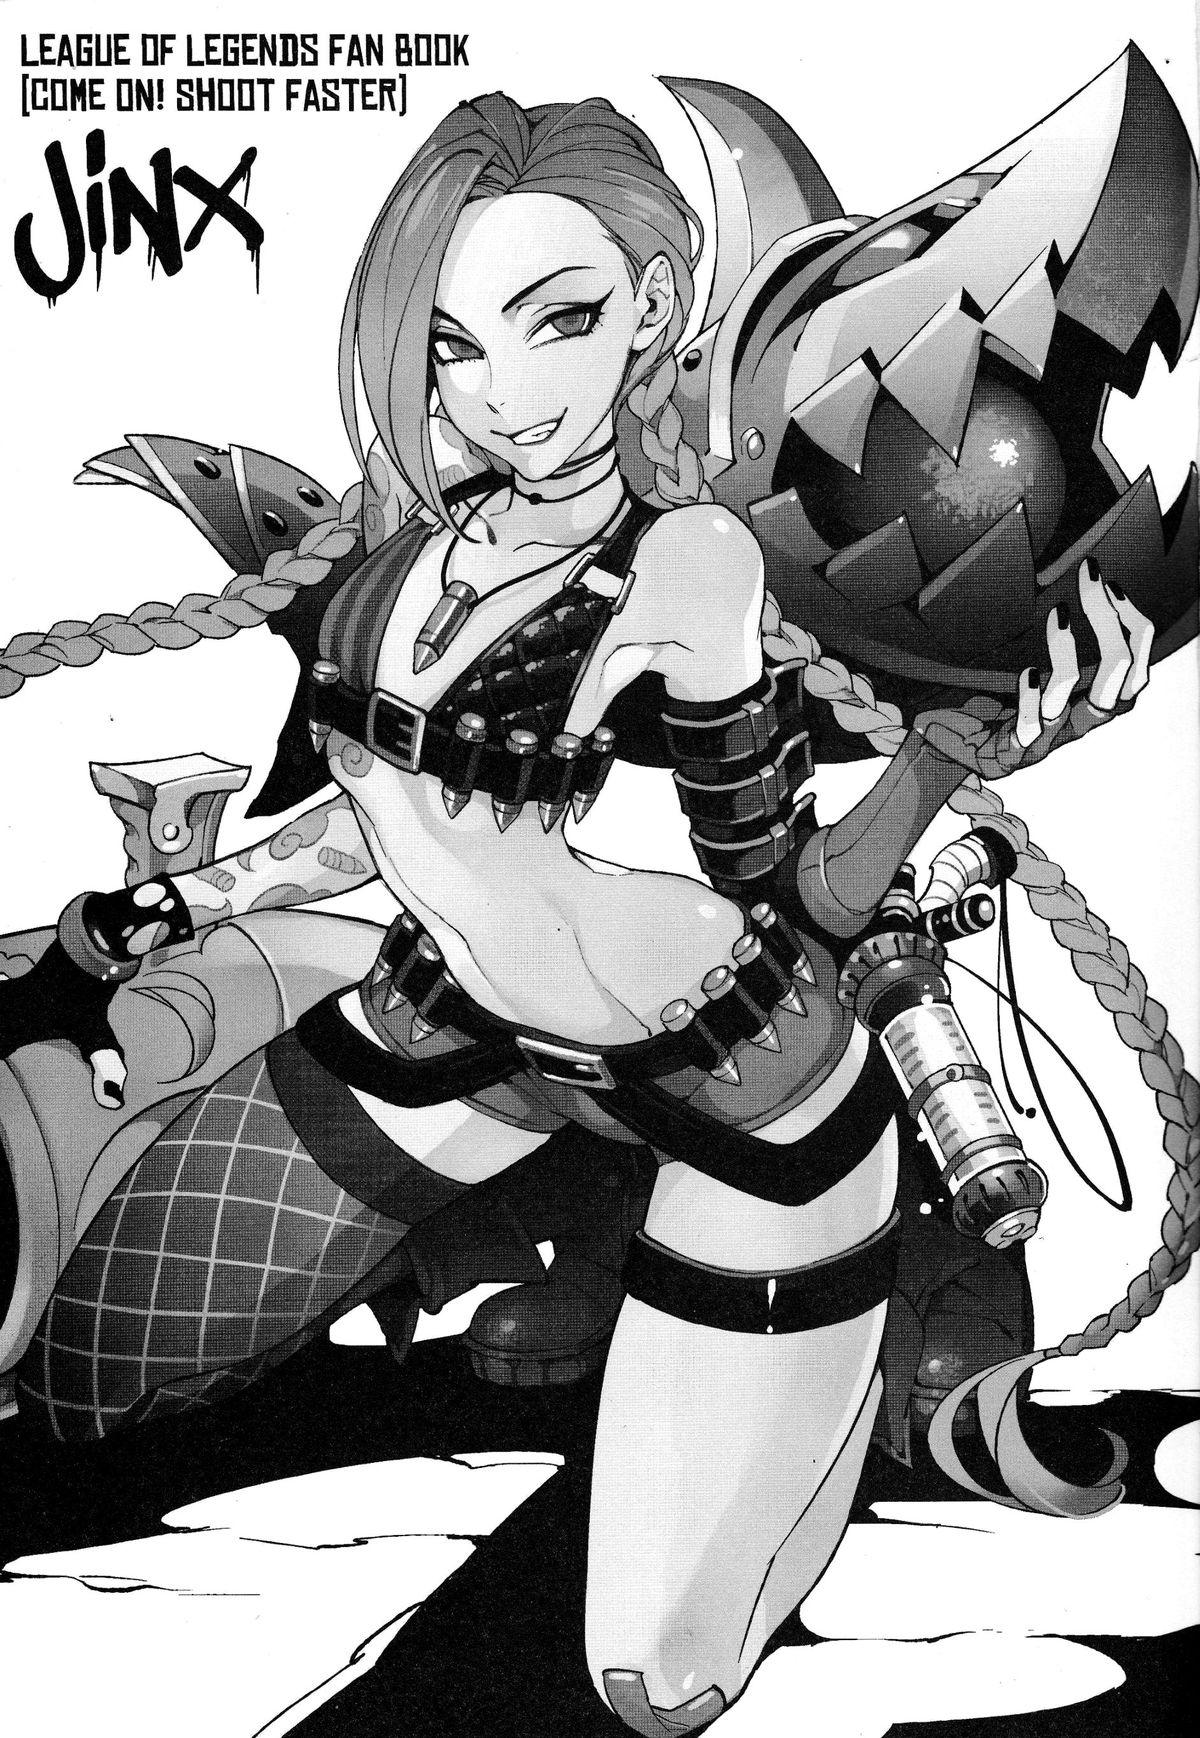 Cbt JINX Come On! Shoot Faster - League of legends Blow Job - Page 2